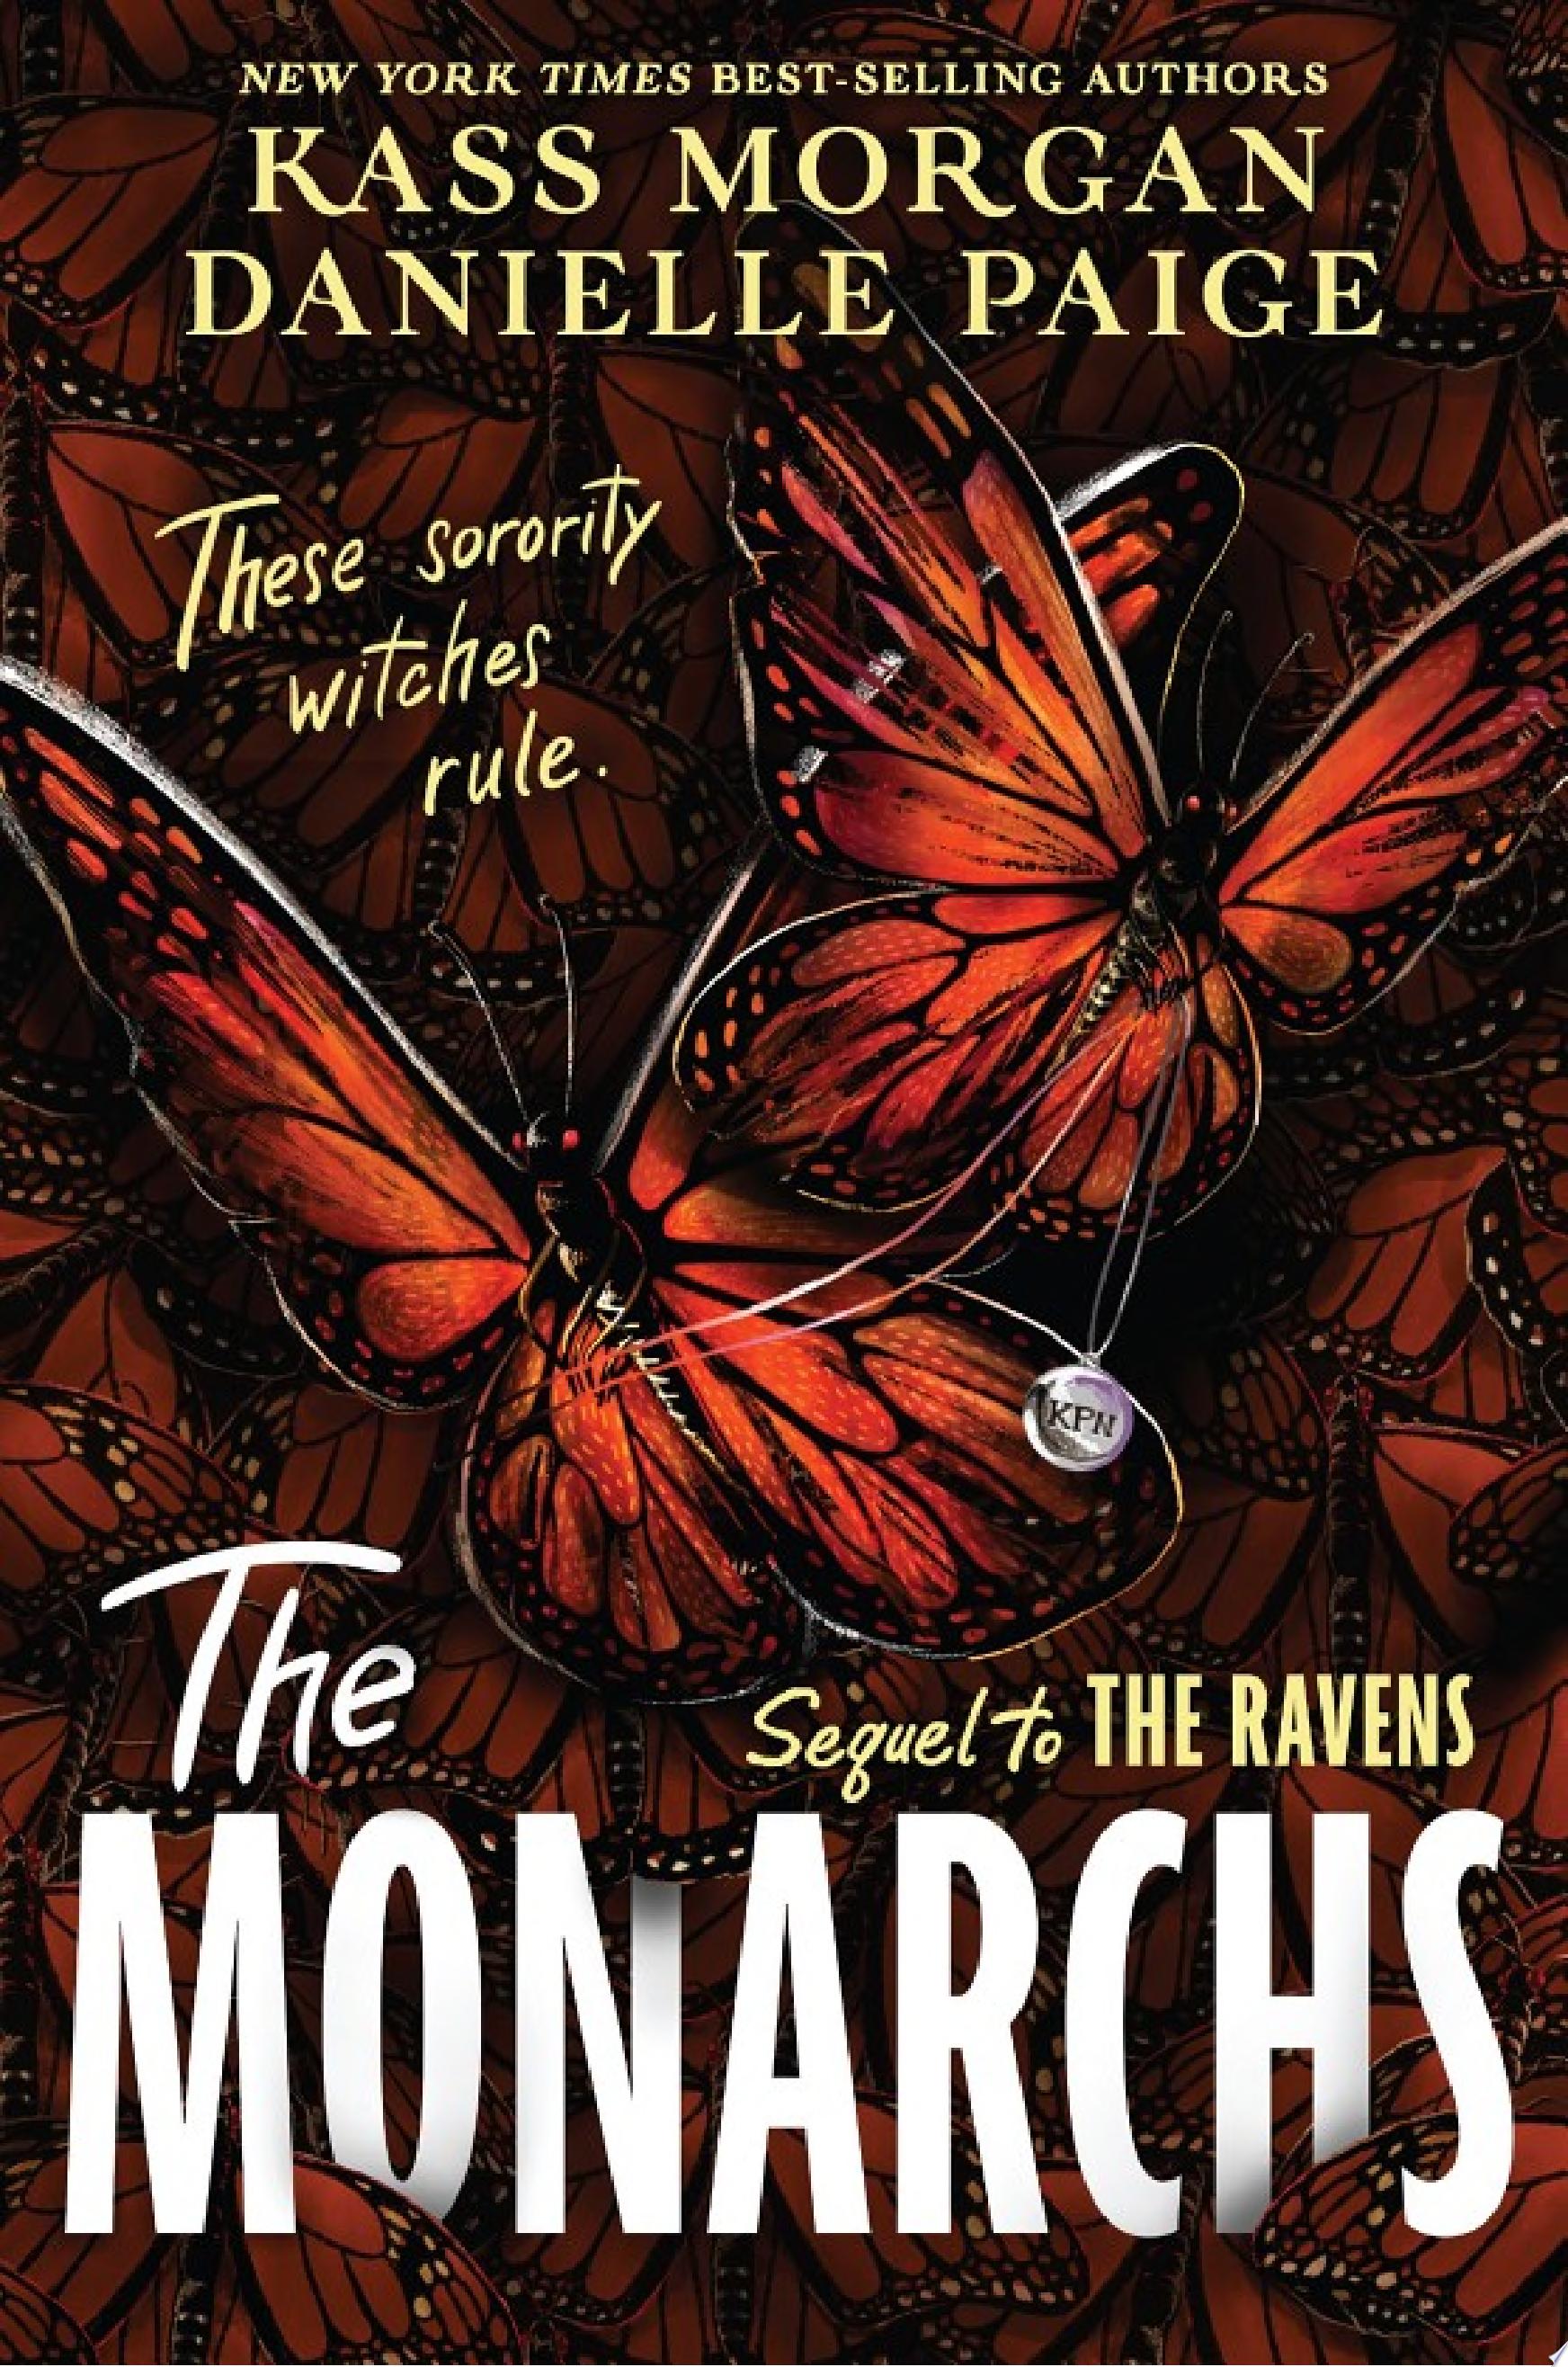 Image for "The Monarchs"